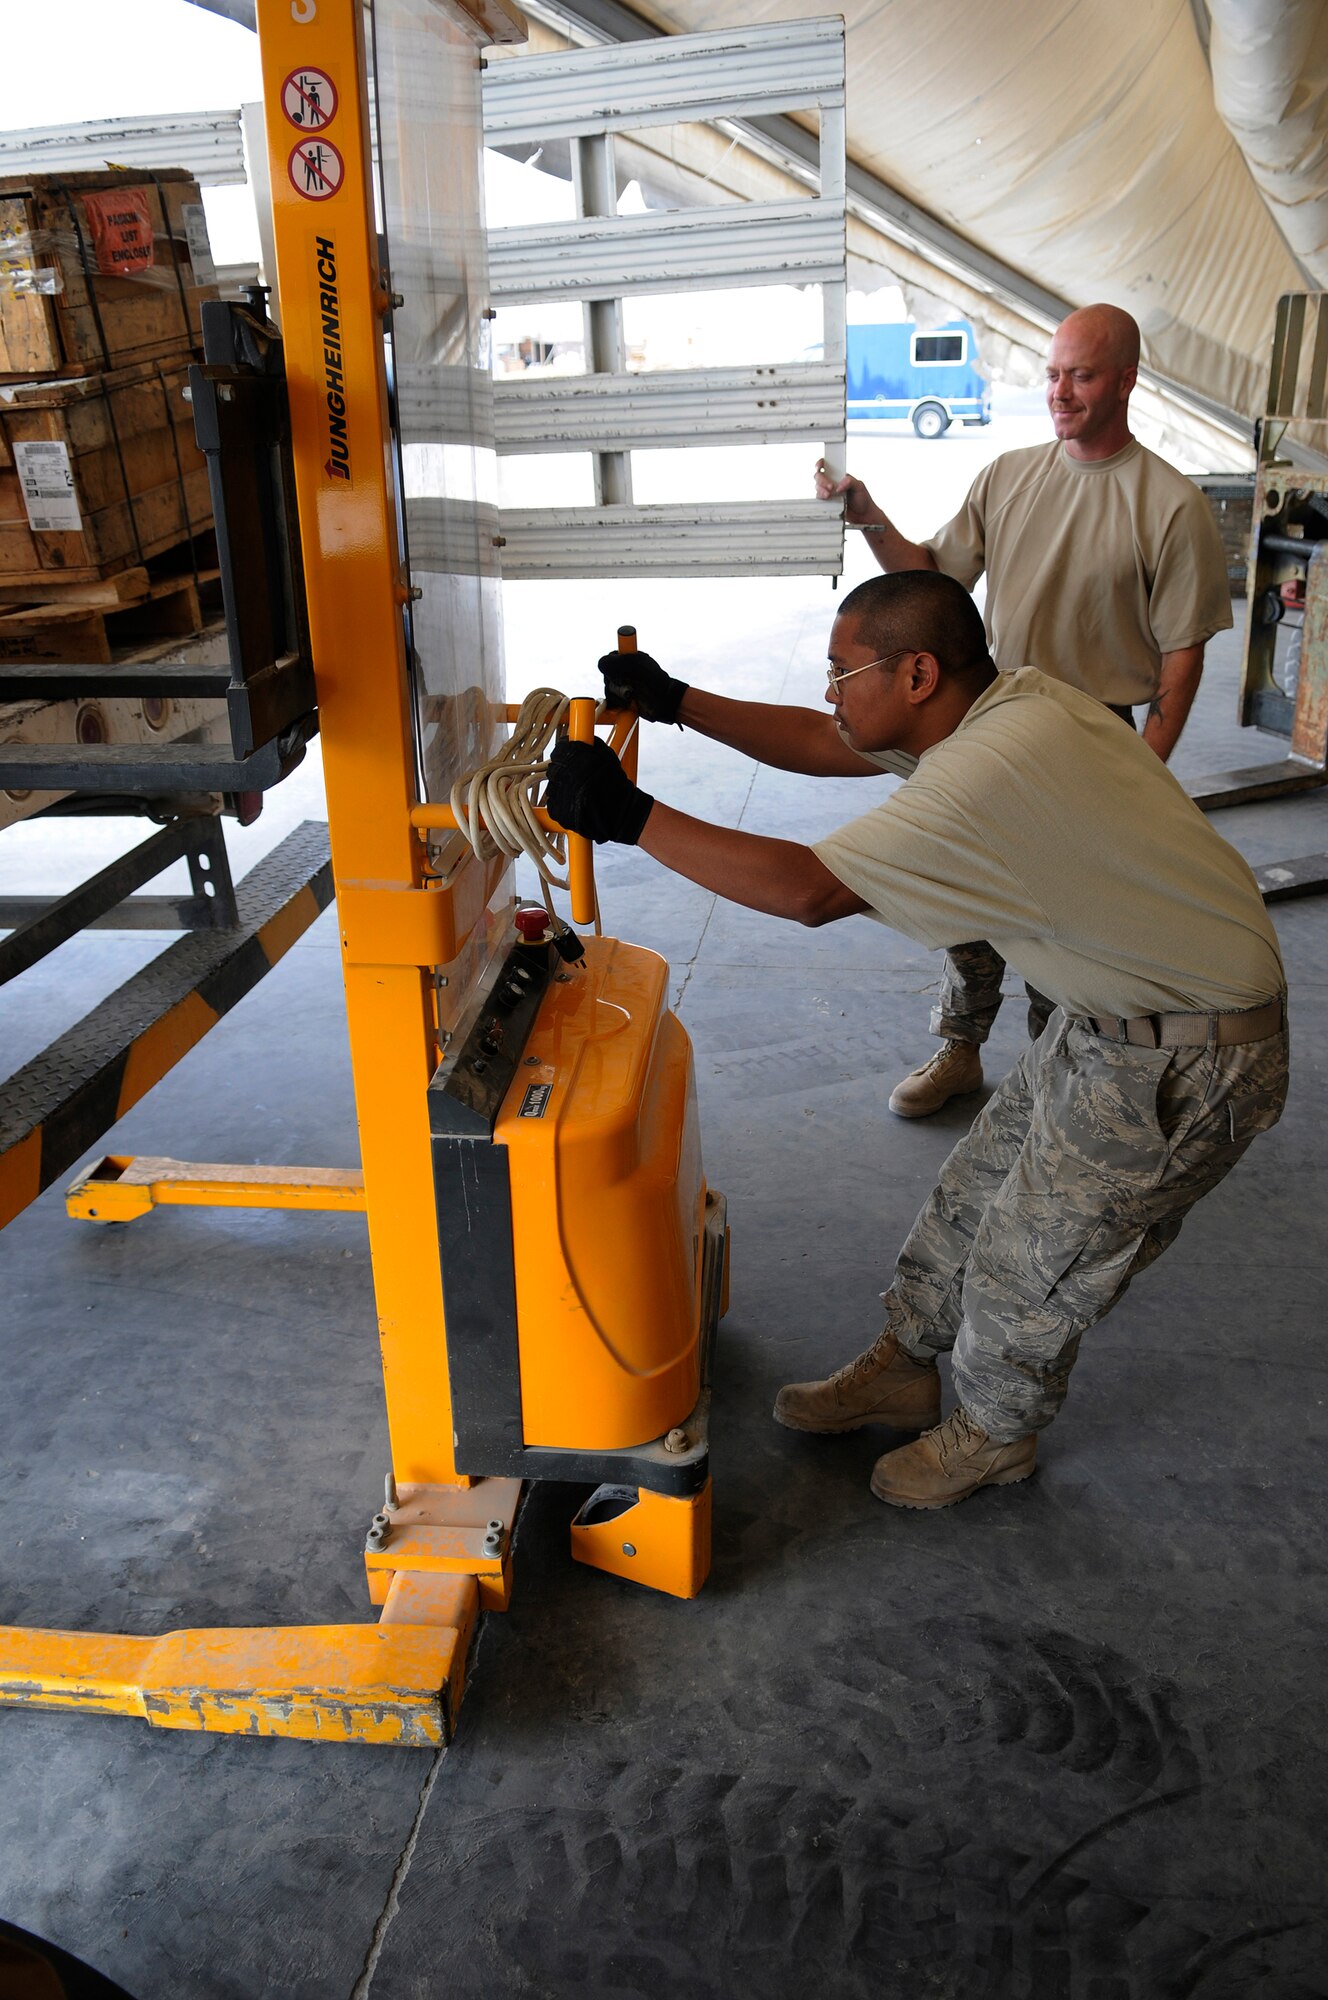 Staff Sgt. Daryl Reid, 379th Expeditionary Logistics Readiness Squadron, holds the tailgate open as Senior Airman Moises Maramba, 379 ELRS, loads a box onto a truck using a half-ton electric stacker, Nov. 6, at an undisclosed air base in Southwest Asia.  The box contains a pump assembly for a C-130 Hercules and is being transported to the 379th Expeditionary Aircraft Maintenance Squadron hydraulic maintenance shop, as a replacement part.  Sergeant Reid, a native of Phoenix, Ariz., is deployed from Mountain Home Air Force Base, Idaho.  Airman Maramba hails from the Bronx, N.Y., and is deployed from MacDill AFB, Fla.  Both are deployed in support of Operations Iraqi and Enduring Freedom and Joint Task Force-Horn of Africa.  (U.S. Air Force photo by Tech. Sgt. Michael Boquette/Released)